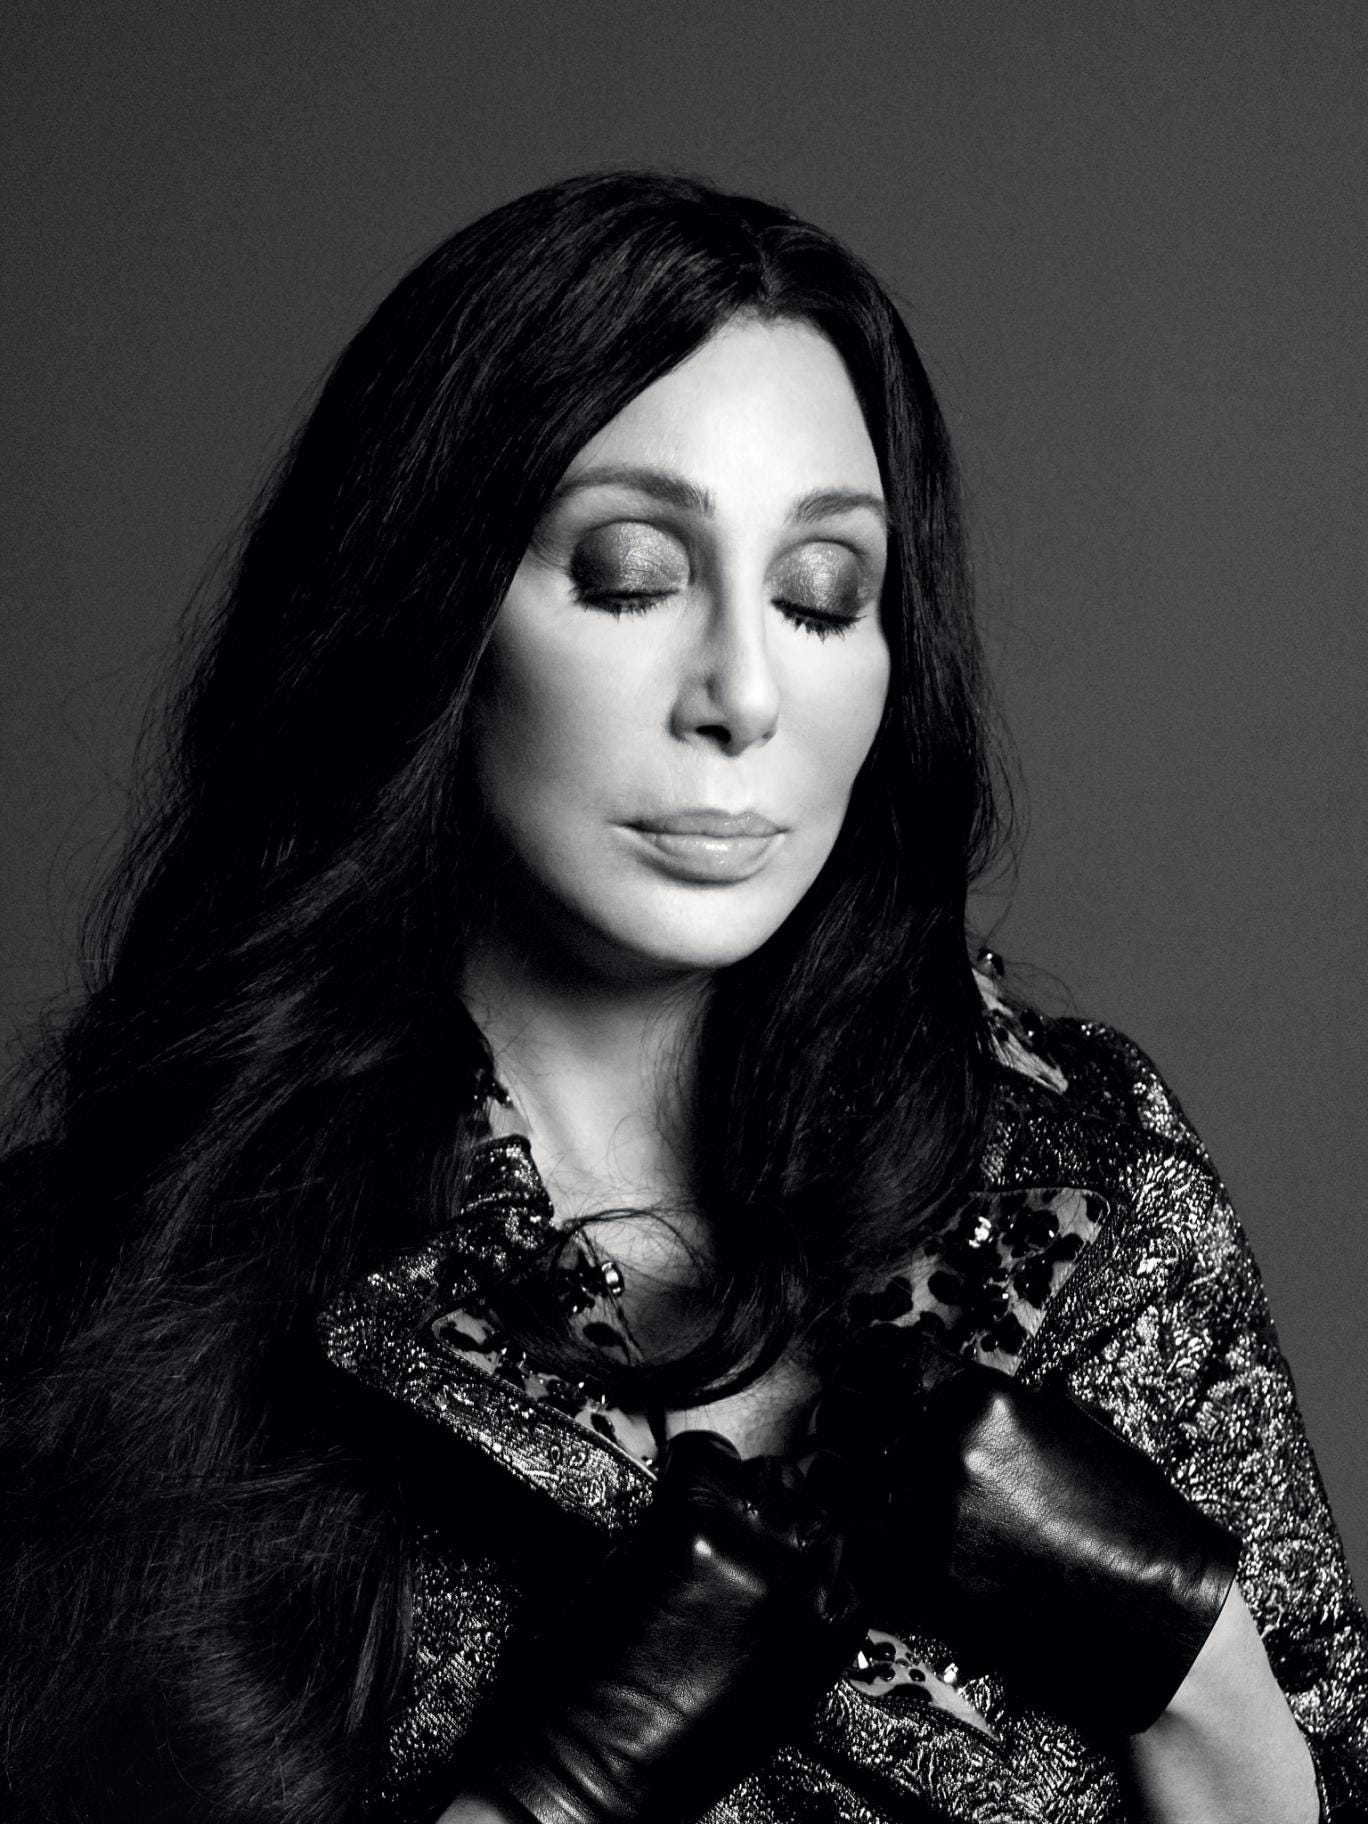 Cher On The Cover Of Love Magazine Queen Of Chiffon And Sequins Is The